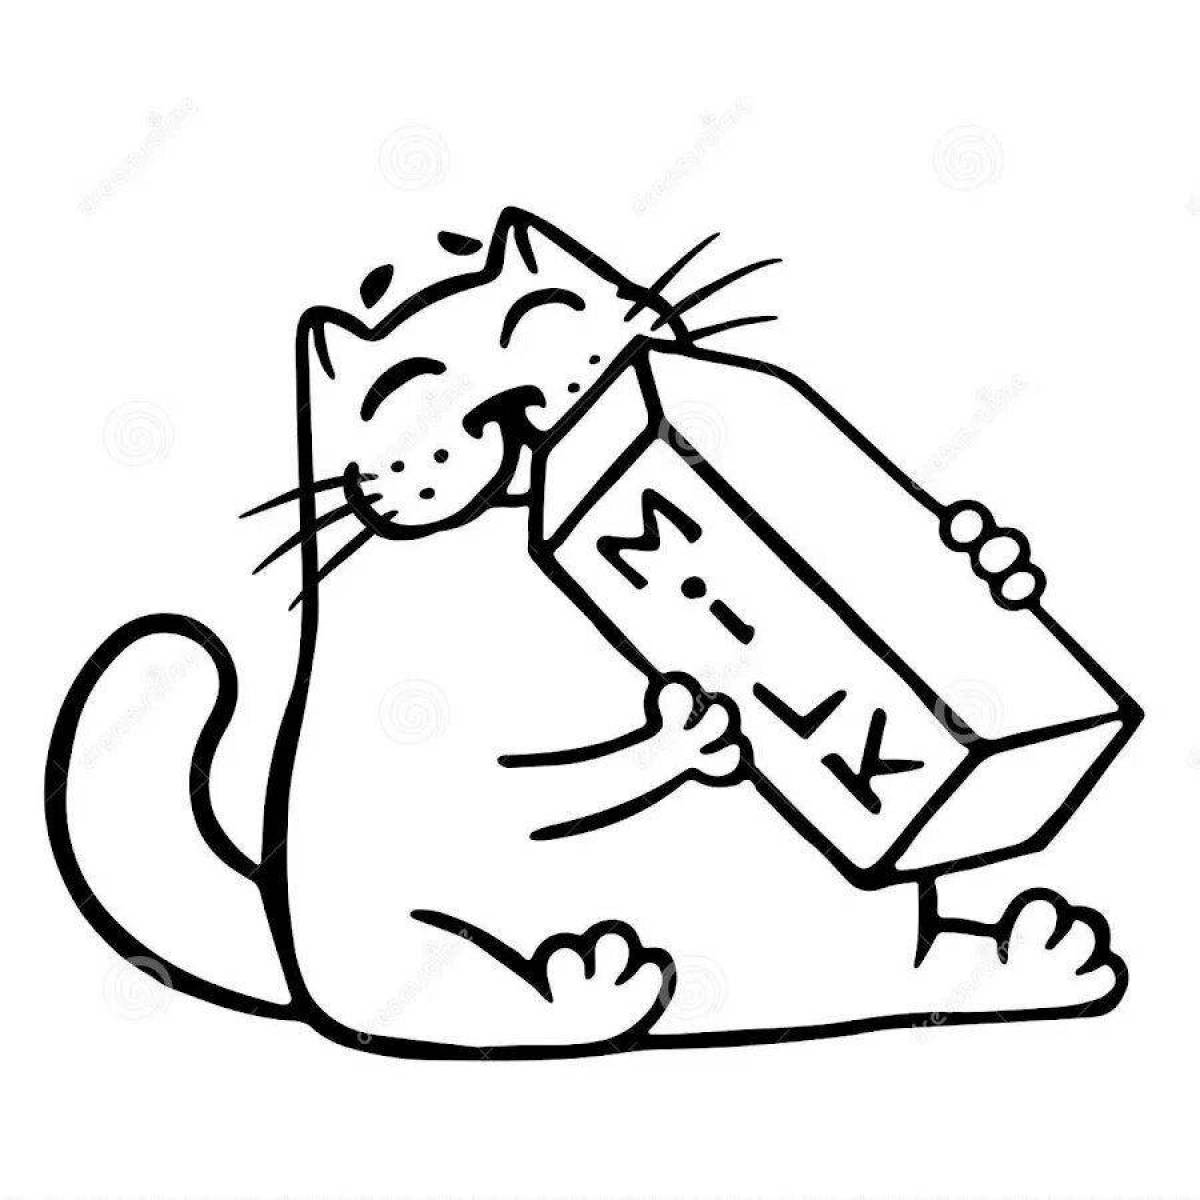 Curious cat drinking milk coloring page